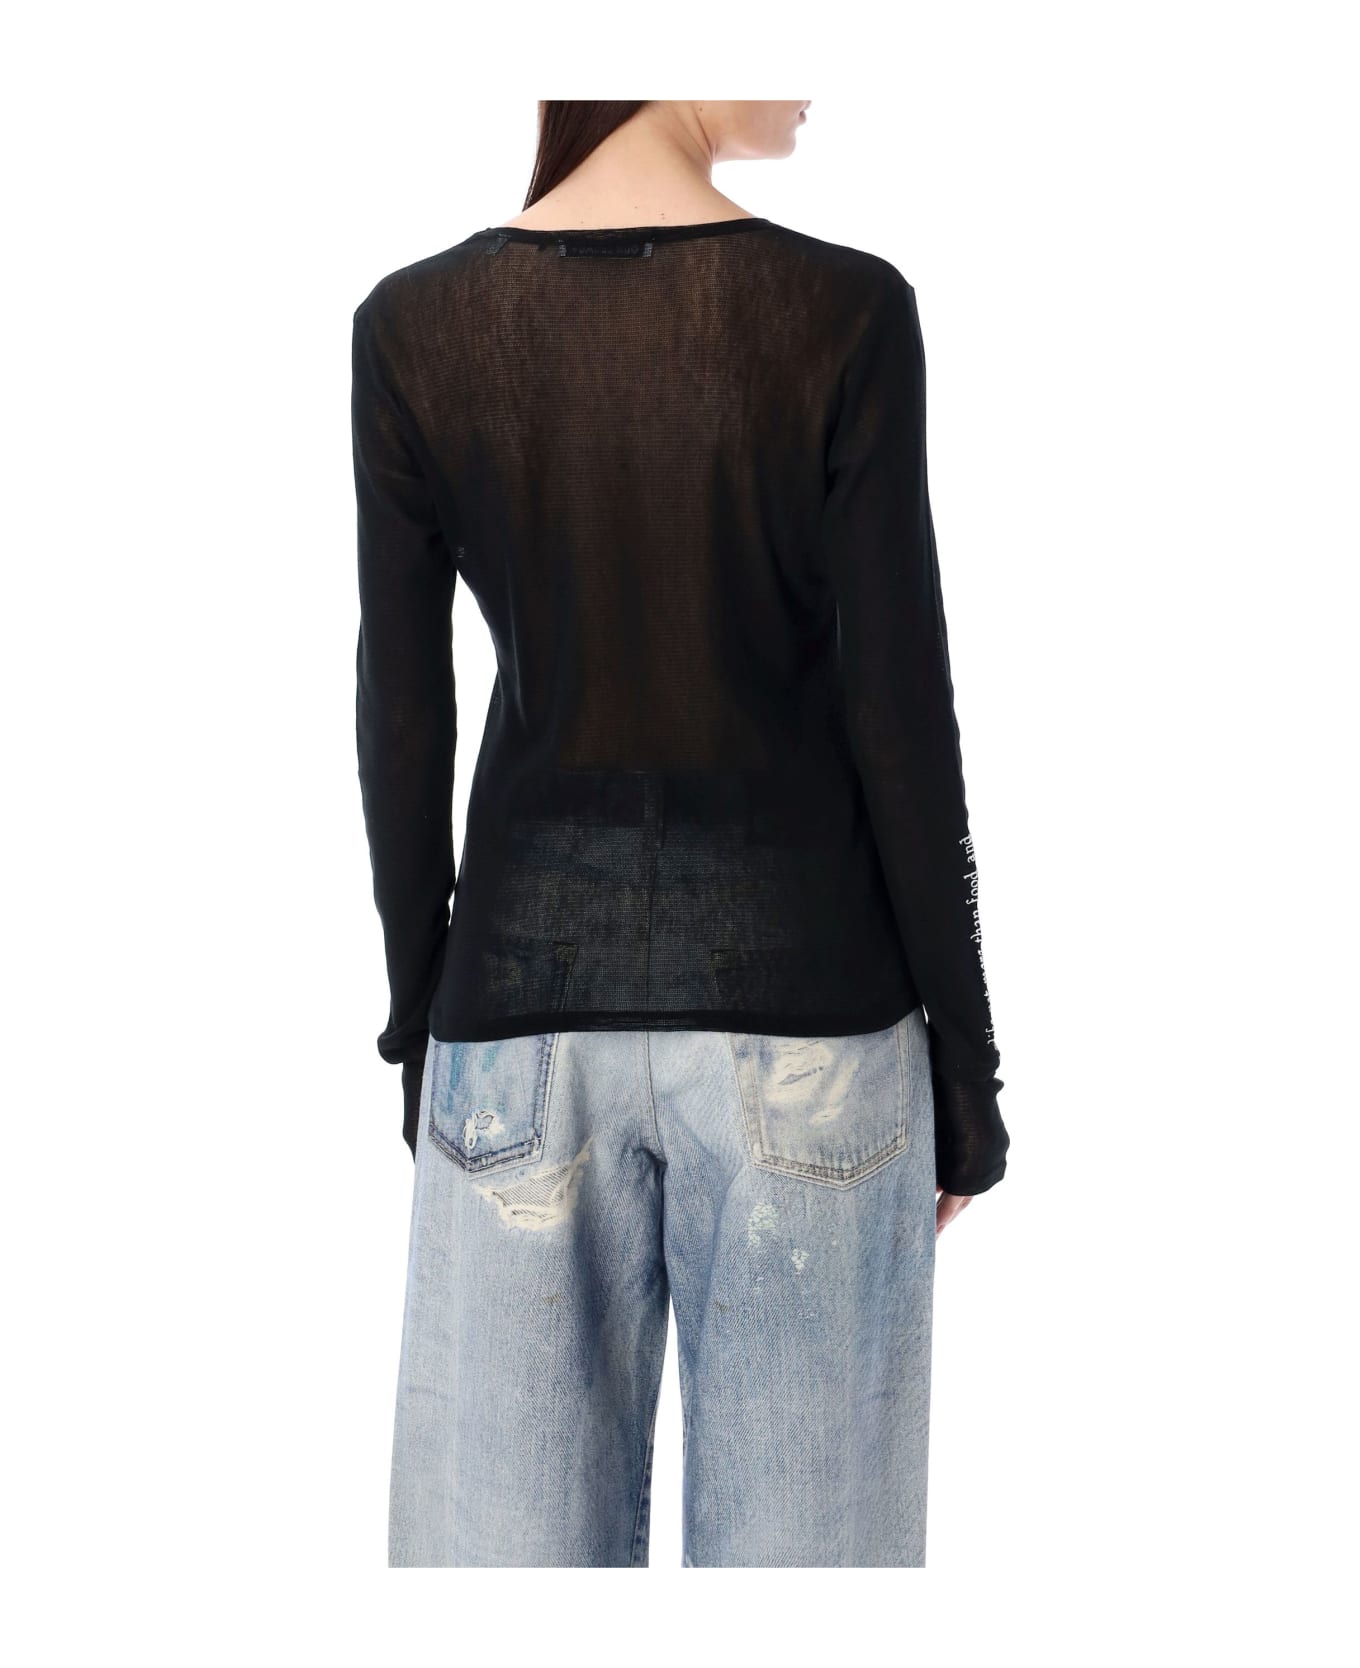 Our Legacy Tast Of Hand Print Top - BLACK